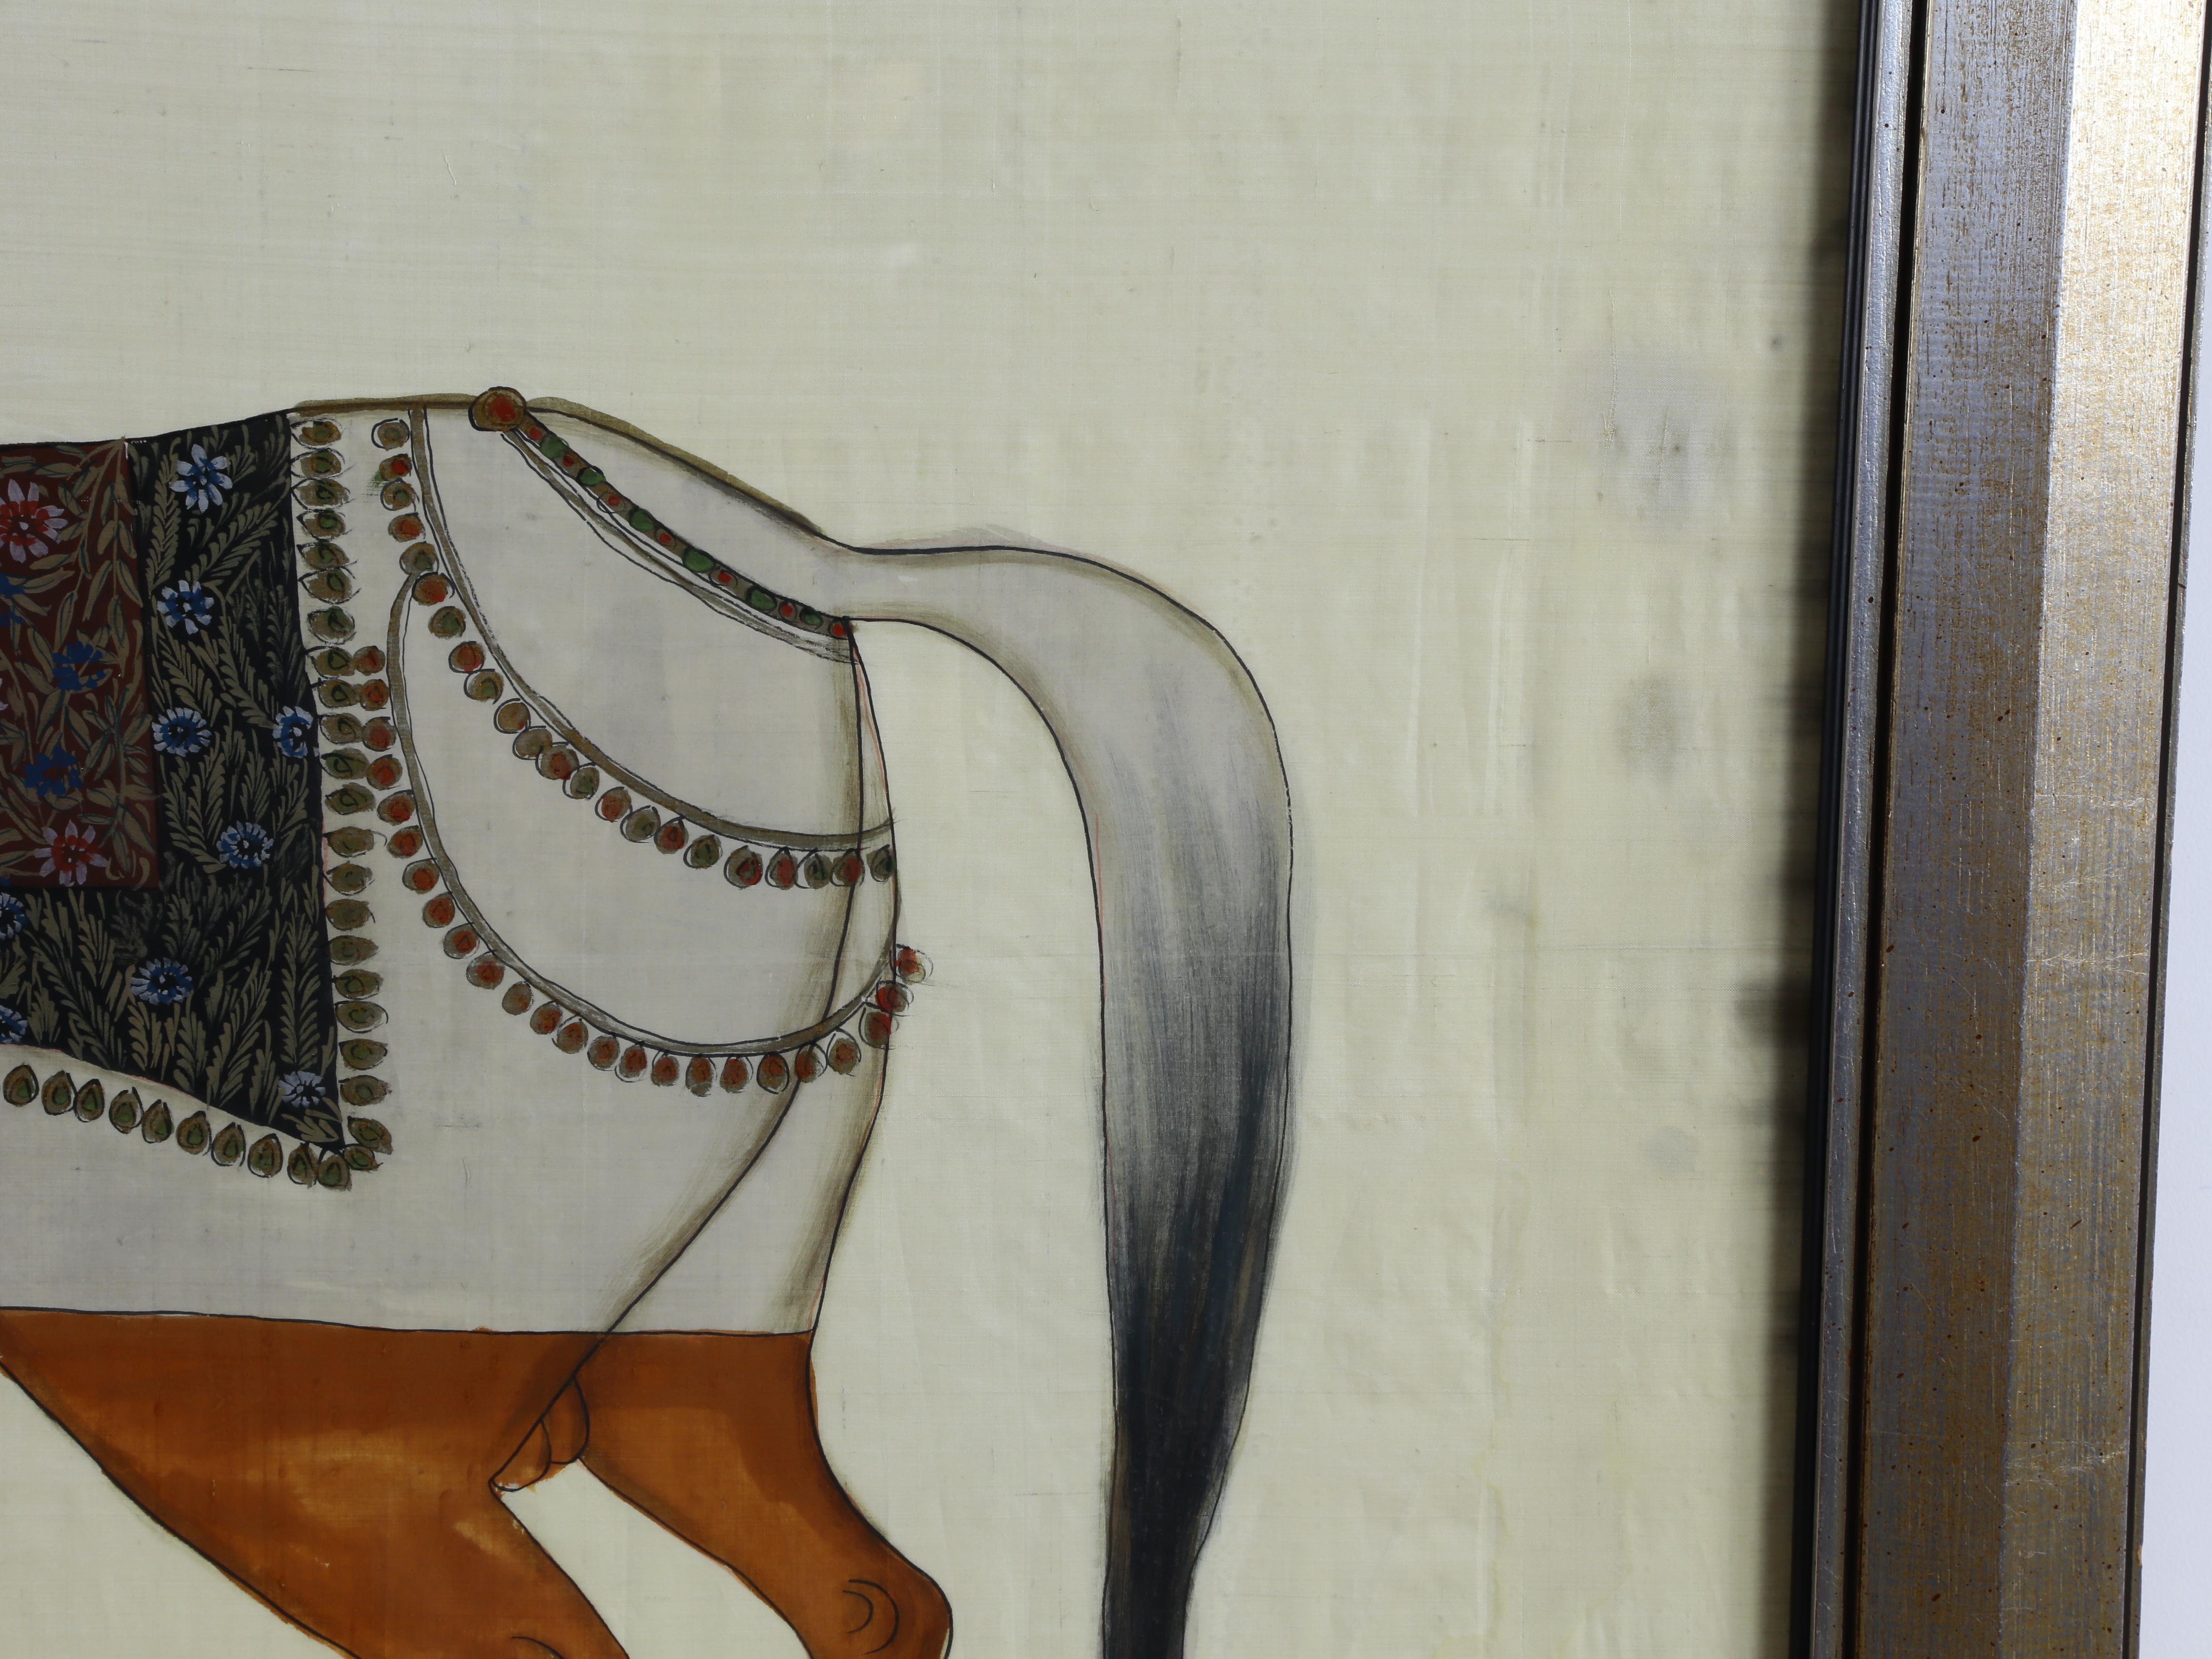 Large painting on silk of a horse, in the Mughal style. His elaborate saddle and bridle show him to belong to gentry! This is a beautiful enlarged modern interpretation of the traditional Mughal style of a miniature painting.
Stains on right side